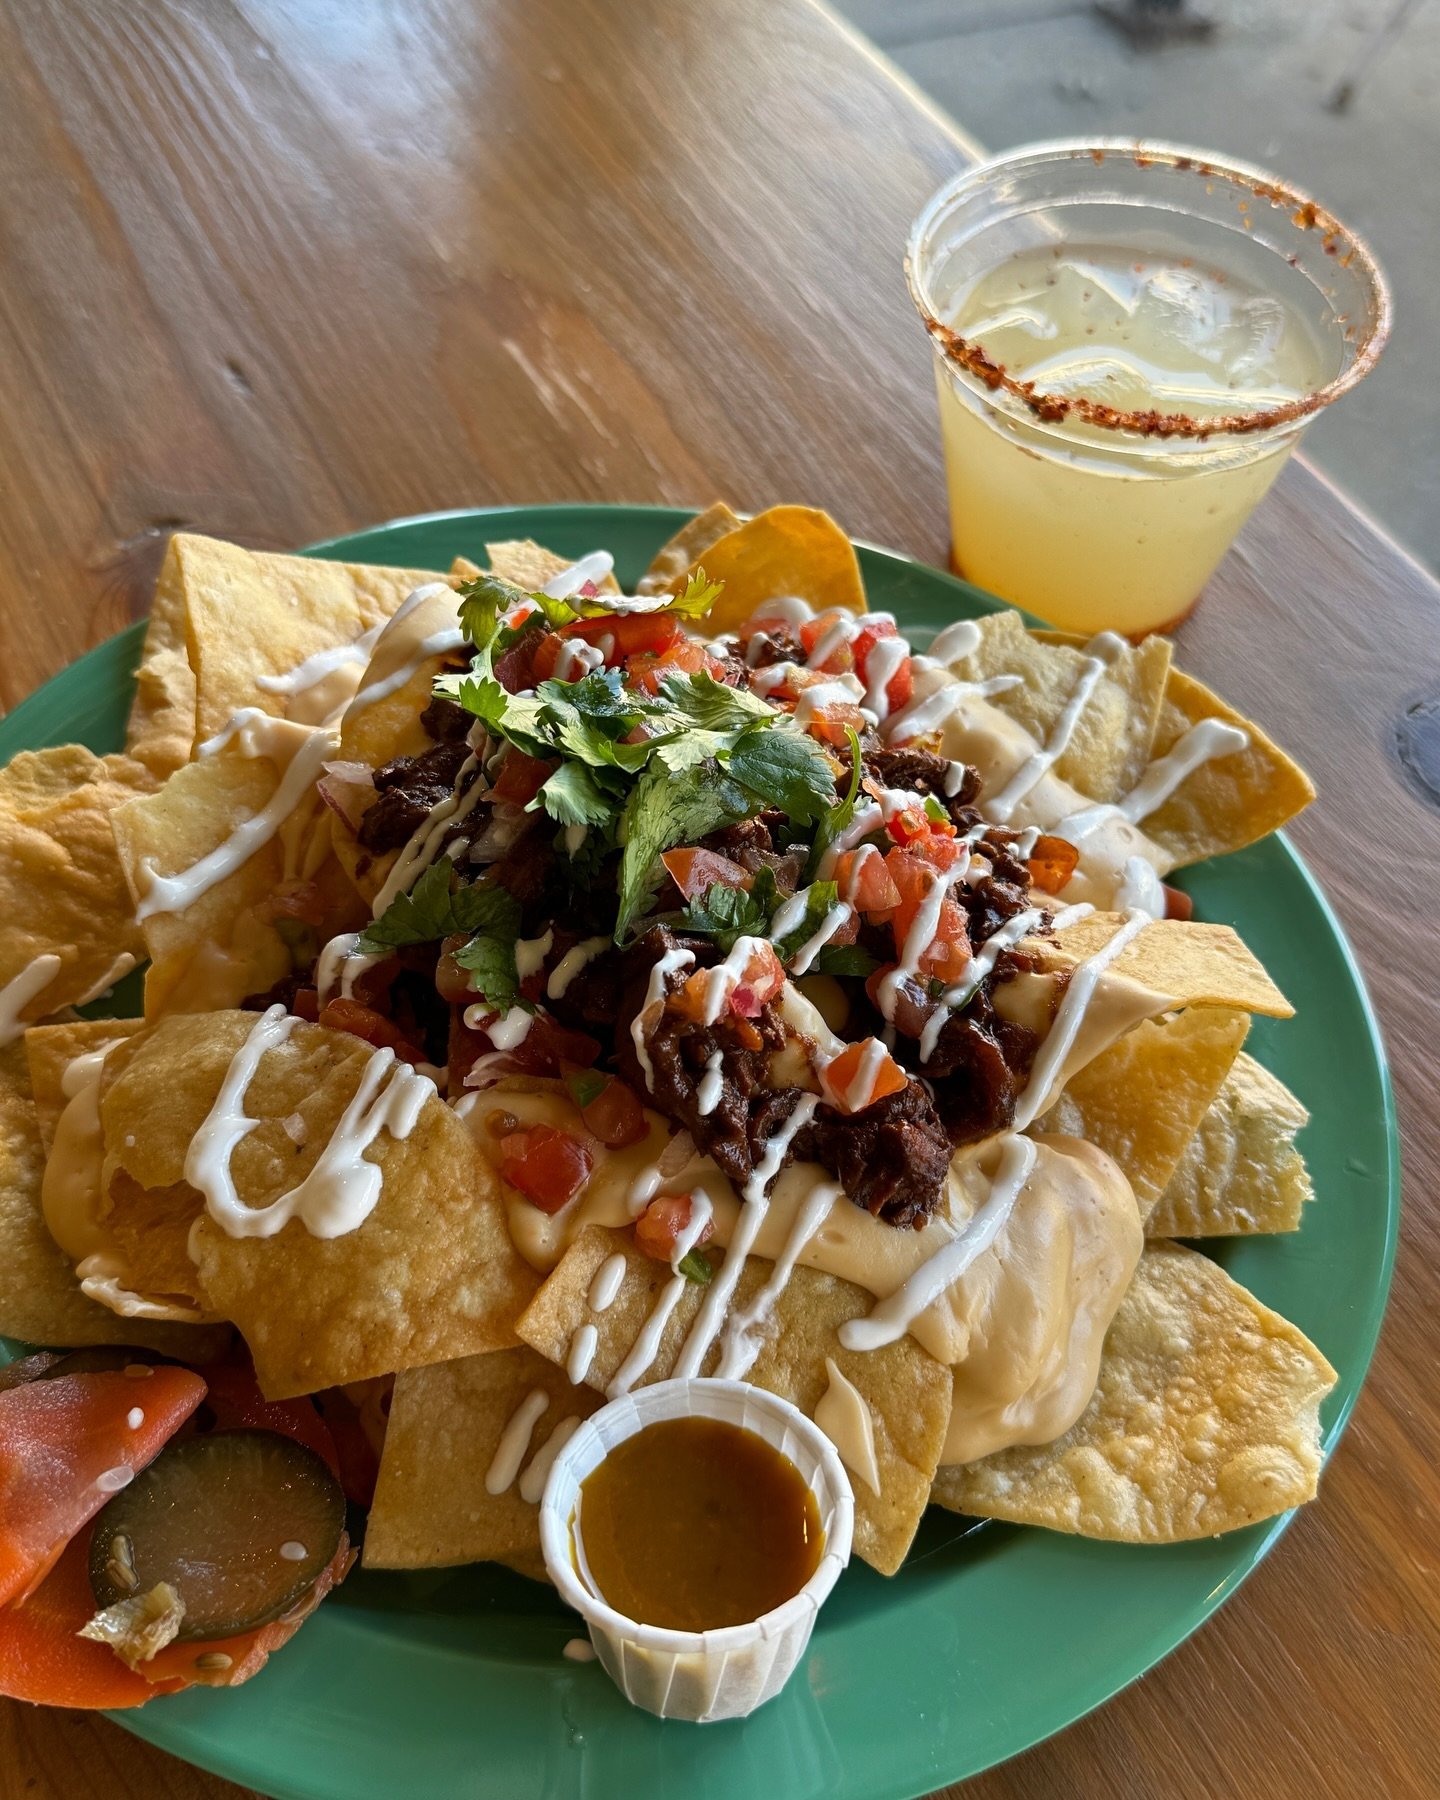 Admit it, this looks tastier than what you had planned for dinner. Head over with your family, friends, or solo and have some delicious Nachos Royale. 

Get in the Zone ⚡️✨⚡️